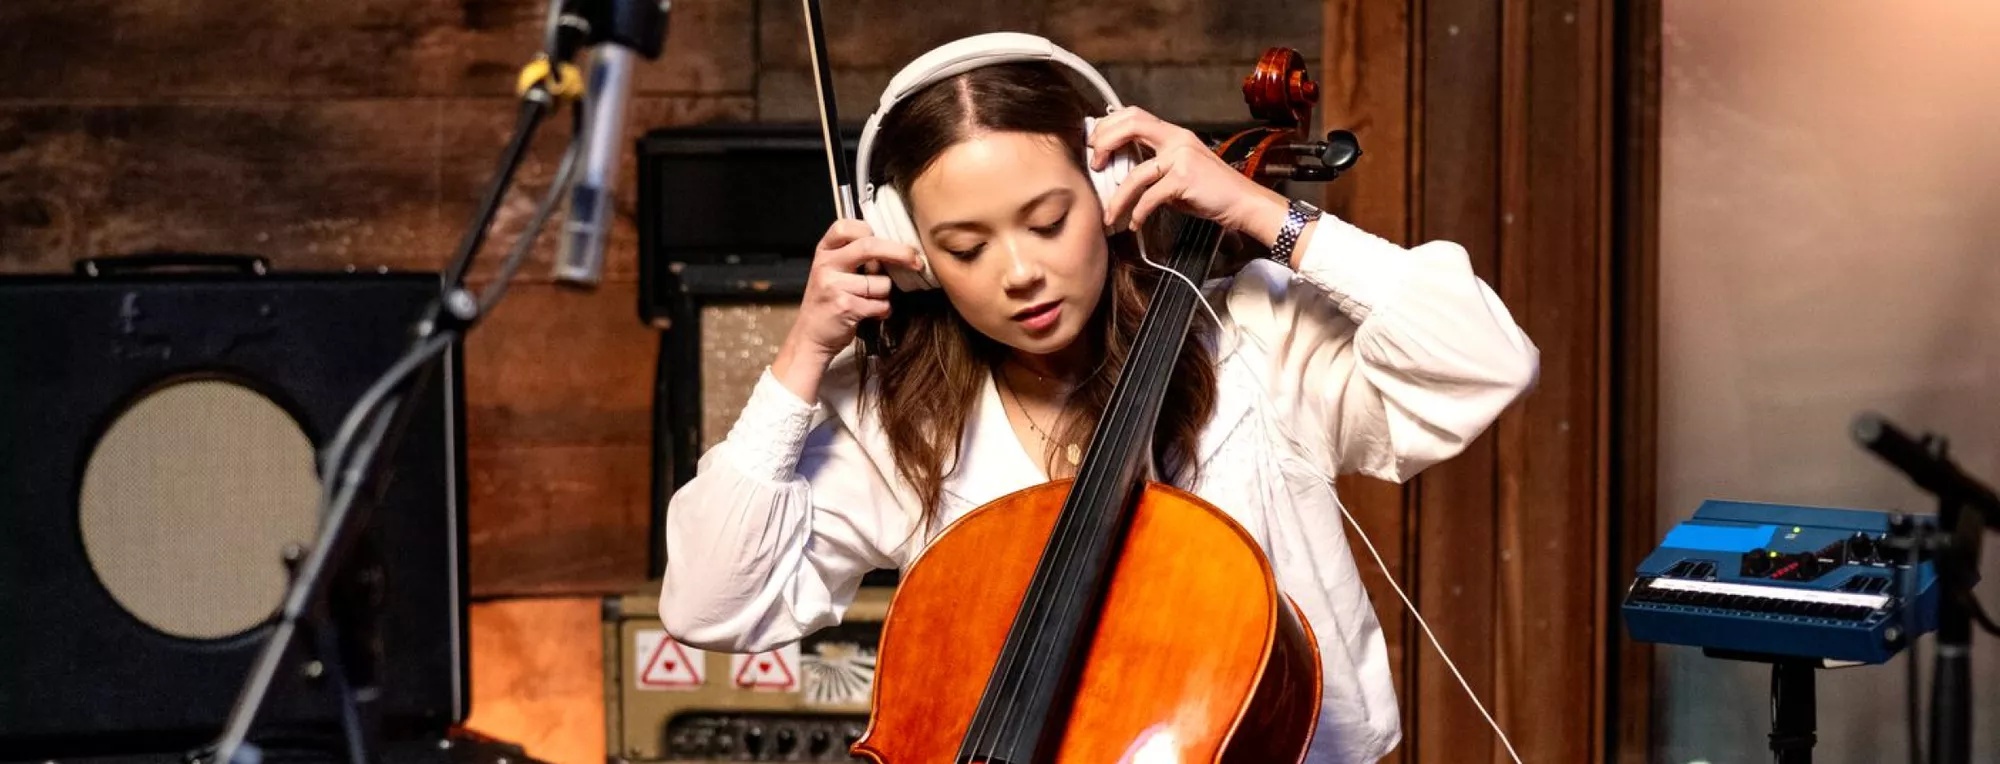 Laufey adjusting her Bose QuietComfort Ultra Headphones while holding a cello